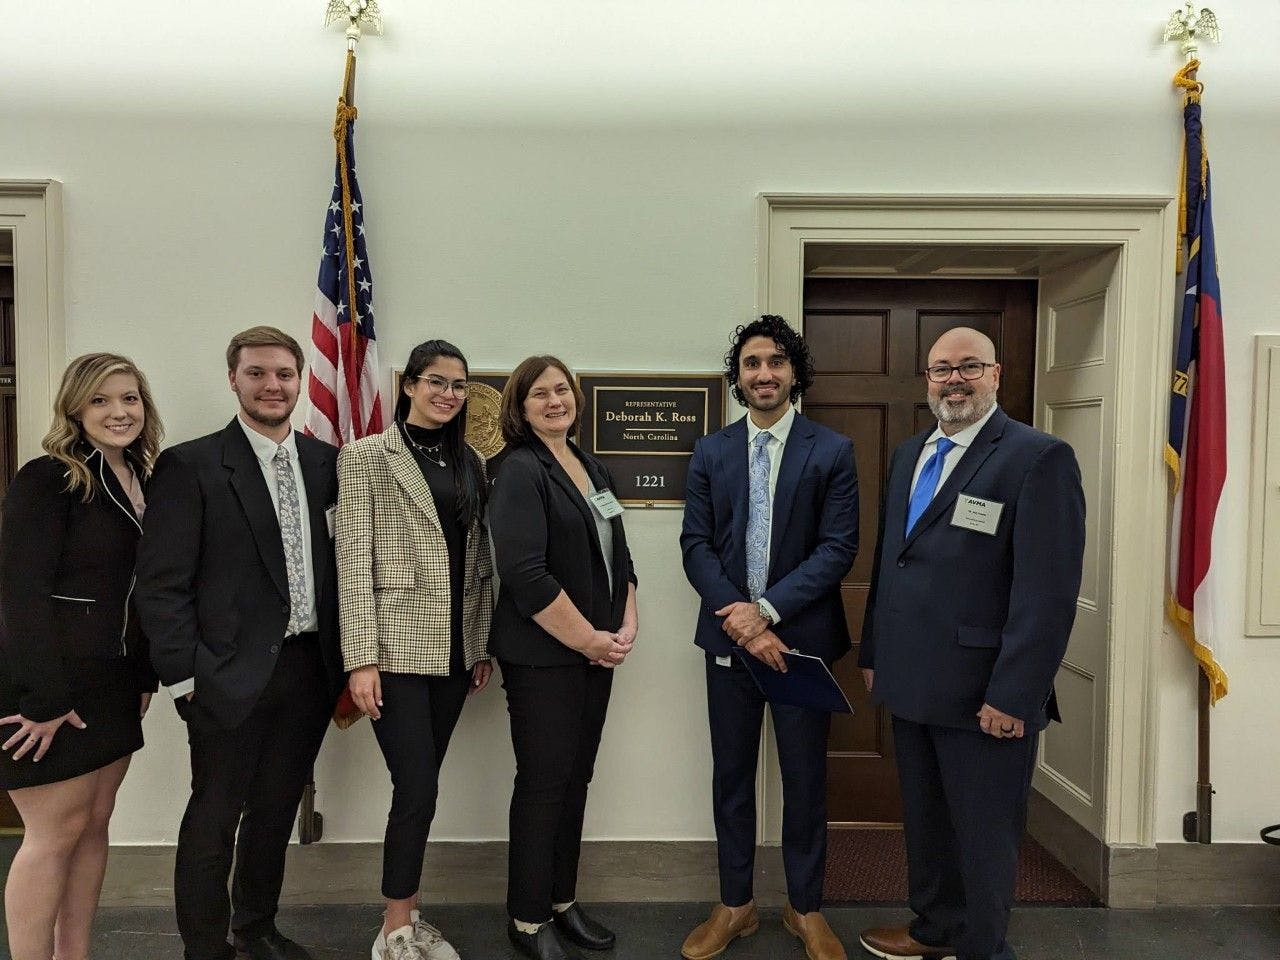 From left to right: Aden Rouse (2nd-year veterinary student at NC State CVM), Zach Cochran (2nd-year student at University of Pennsylvania CVM), myself, Rebecca Stinson, DVM (one of the founders of the Carolina Equine Hospital and the past Vice President of the AVMA), Bardia Asefnia (Congresswoman's legislative assistant), and José Linares, DVM (poultry veterinarian and manager of veterinarian services at CEVA Animal Health LLC).